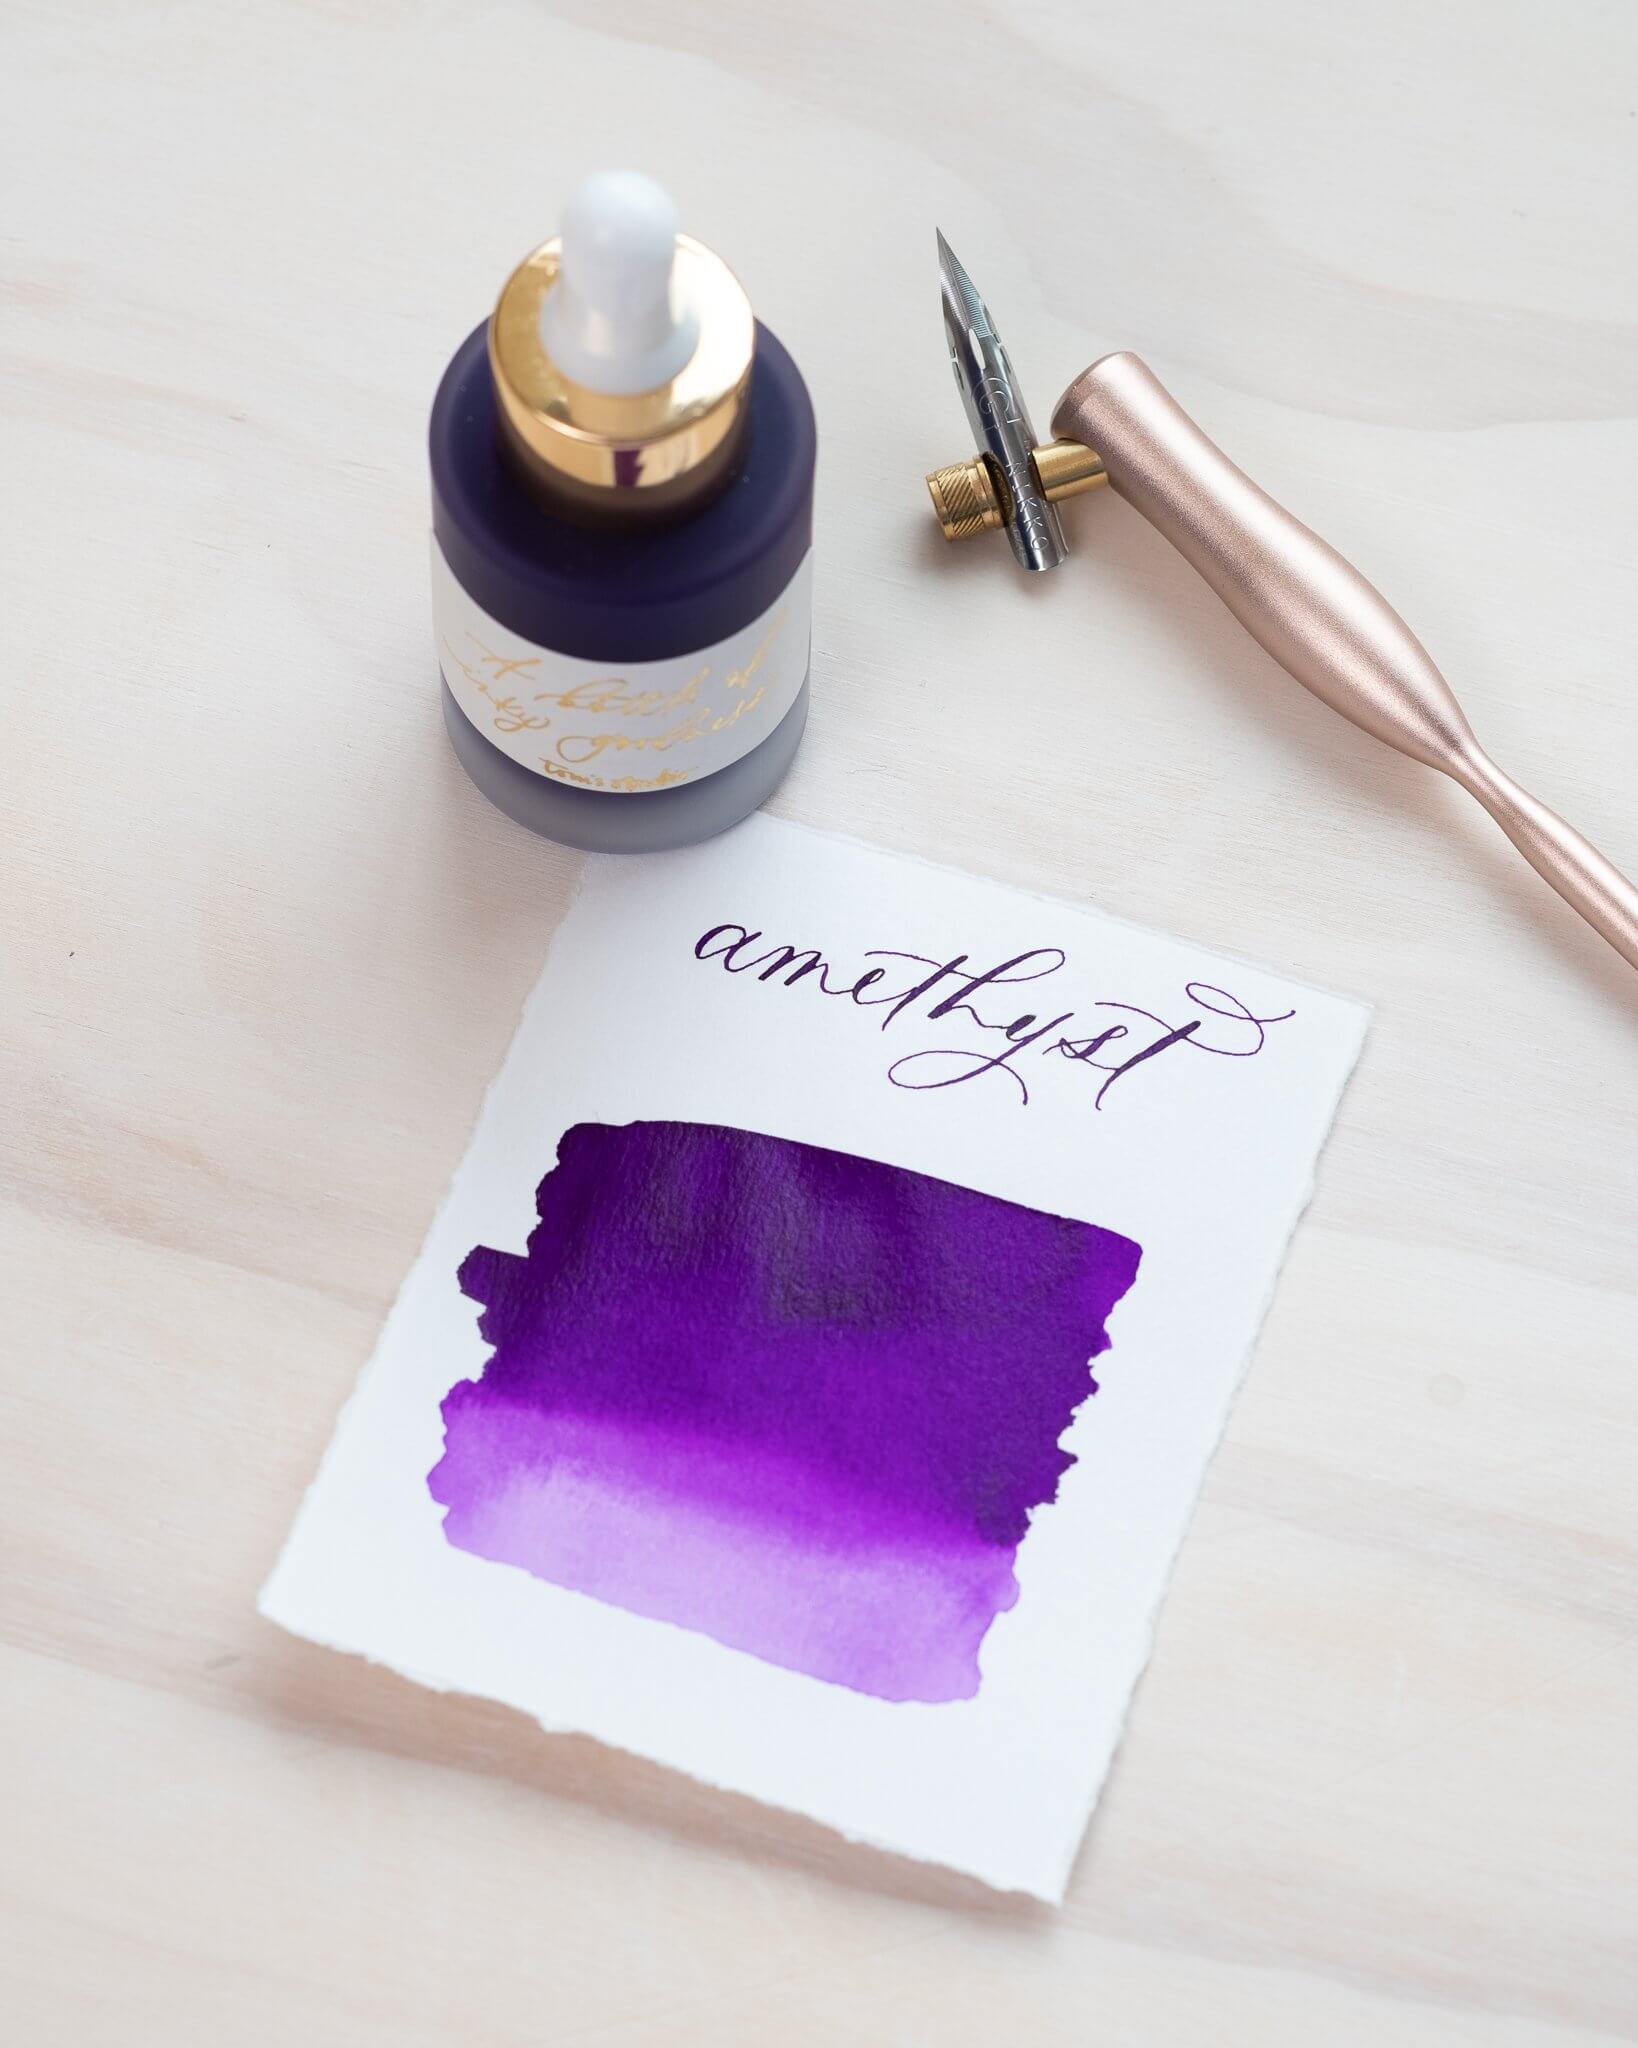 Amethyst - Calligraphy Ink in bottle with swatch showing the ink colour